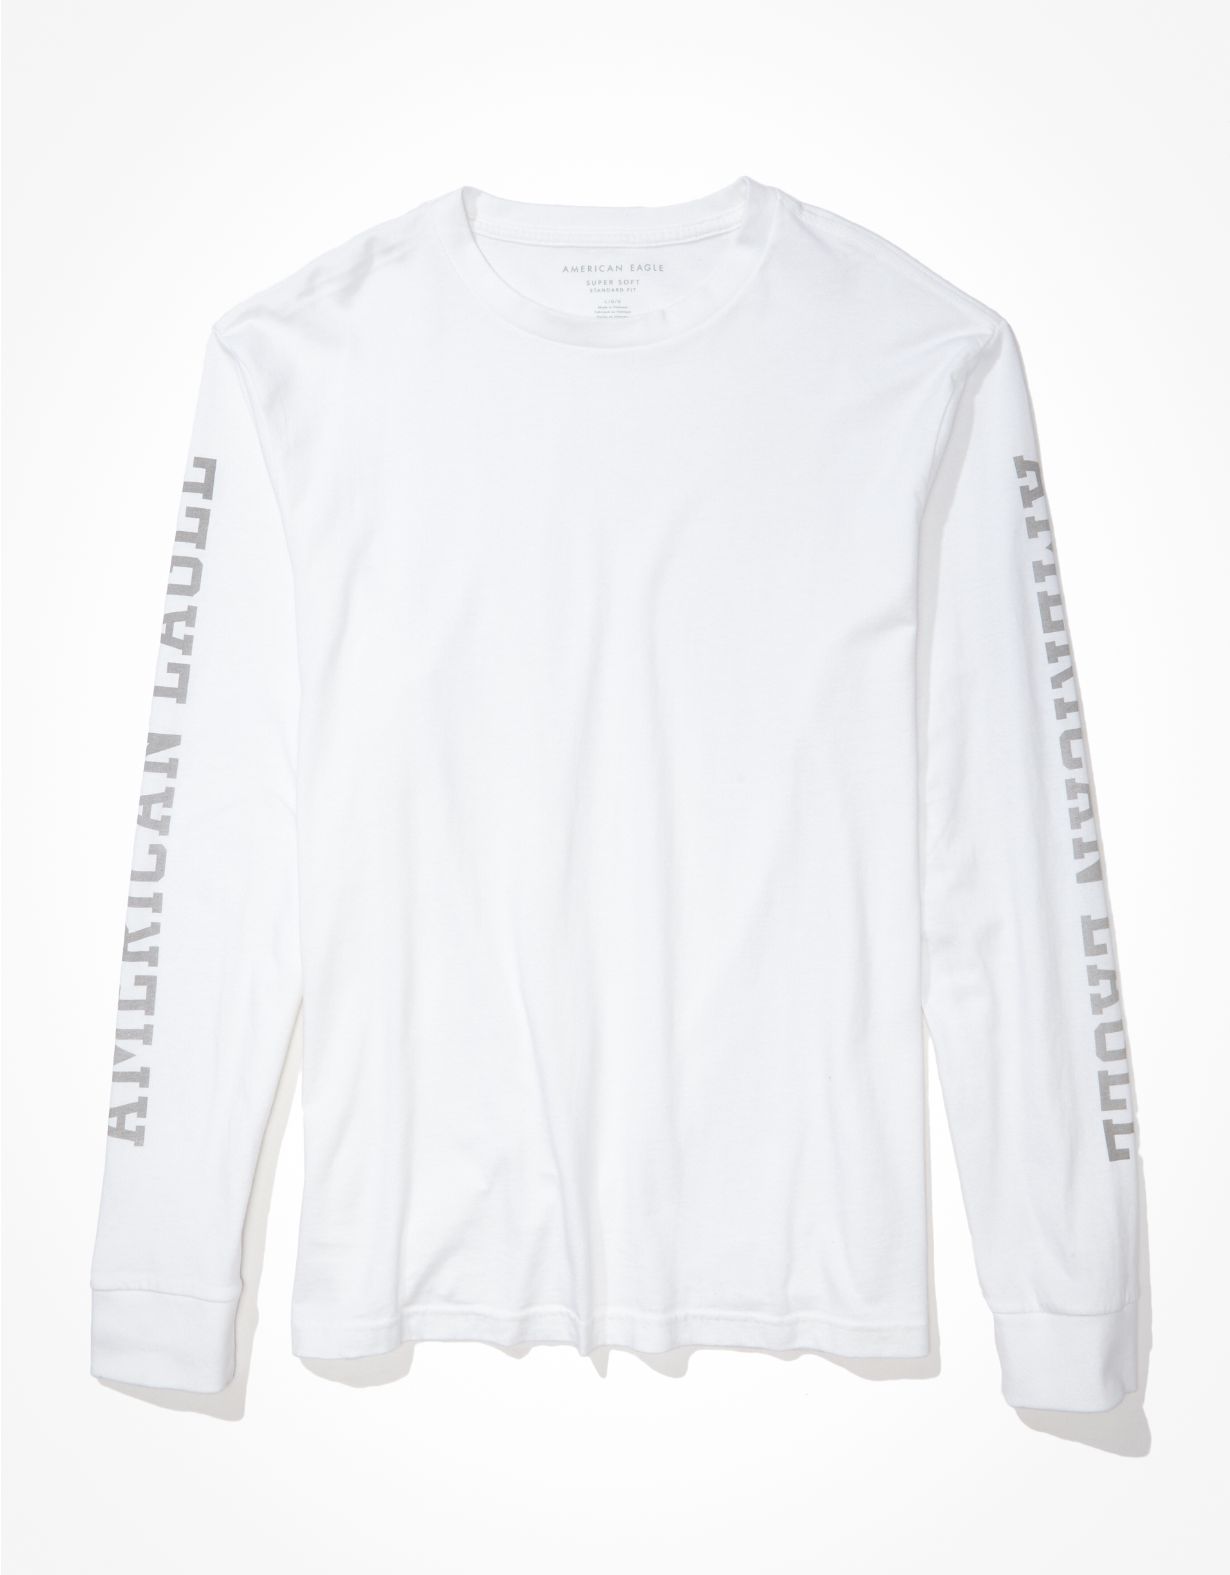 AE Super Soft Icon Long-Sleeve Graphic T-Shirt